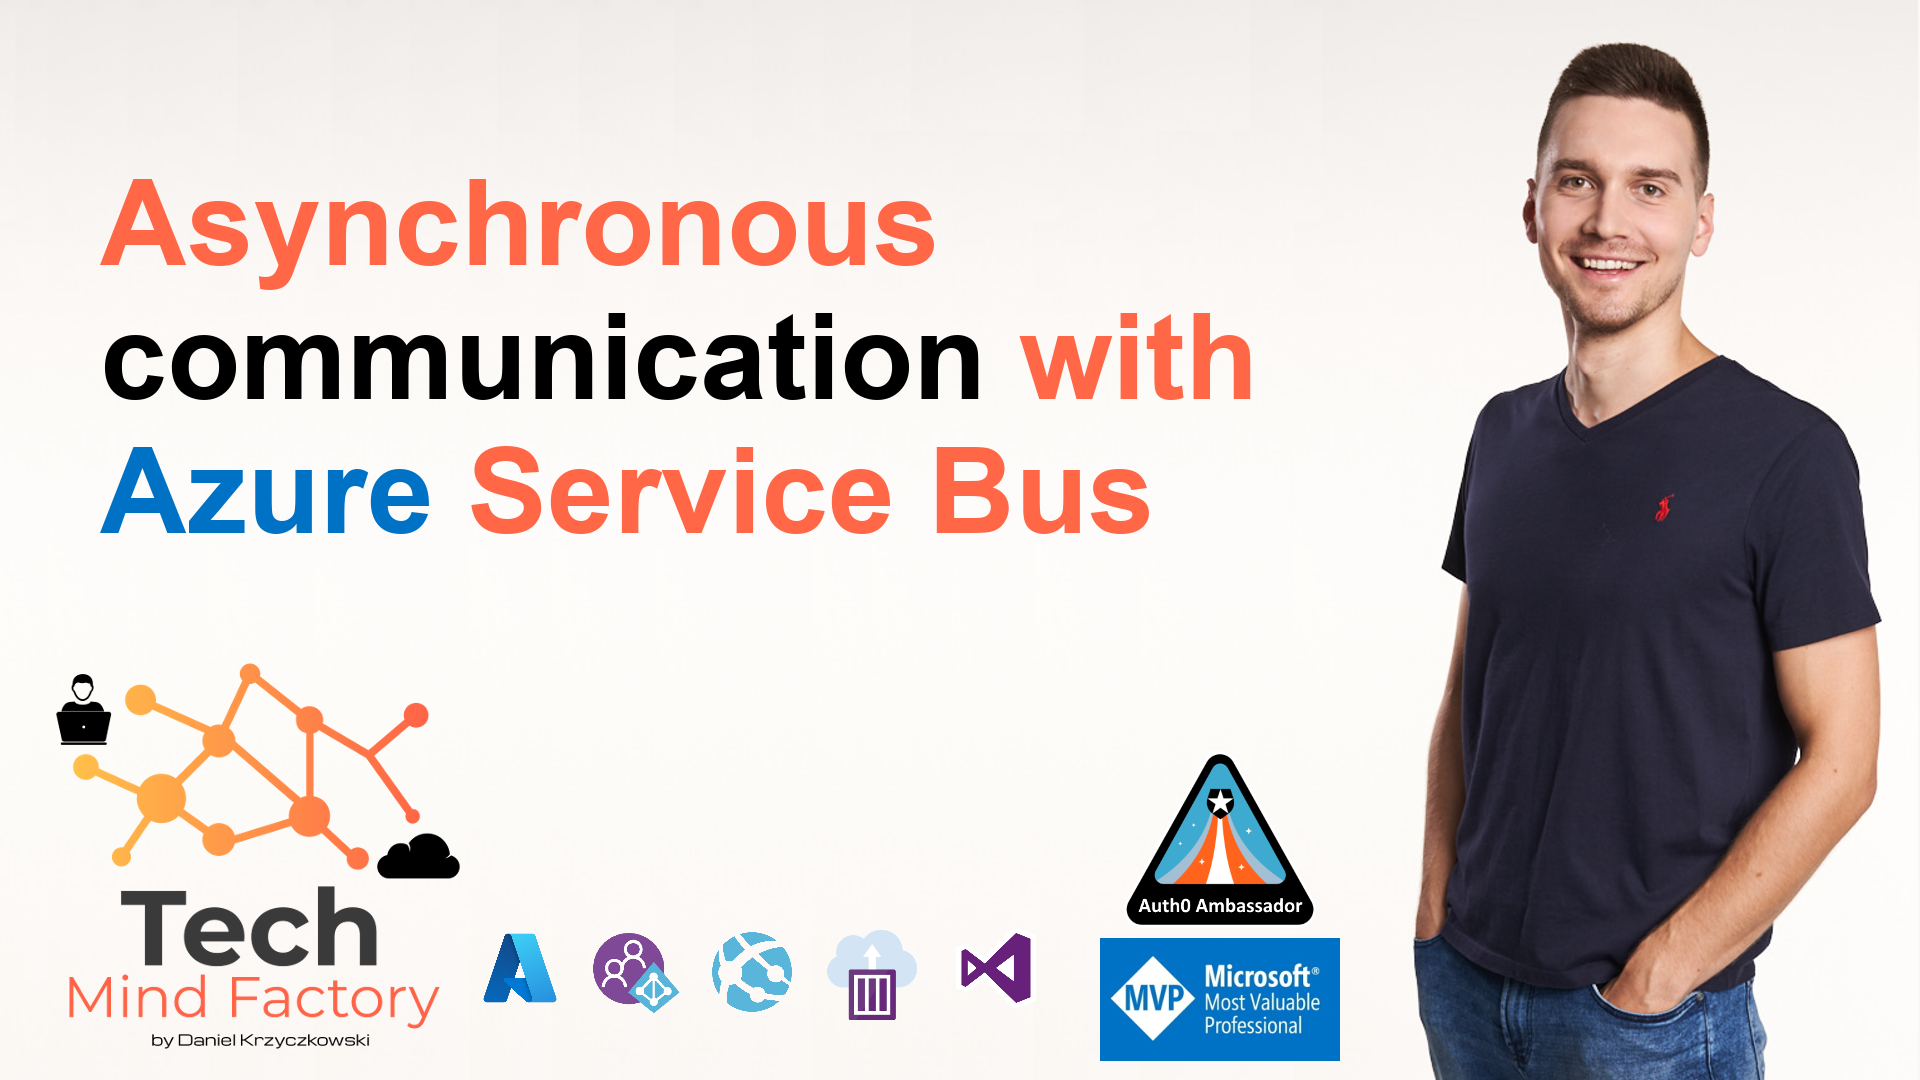 Asynchronous communication with Azure Service Bus